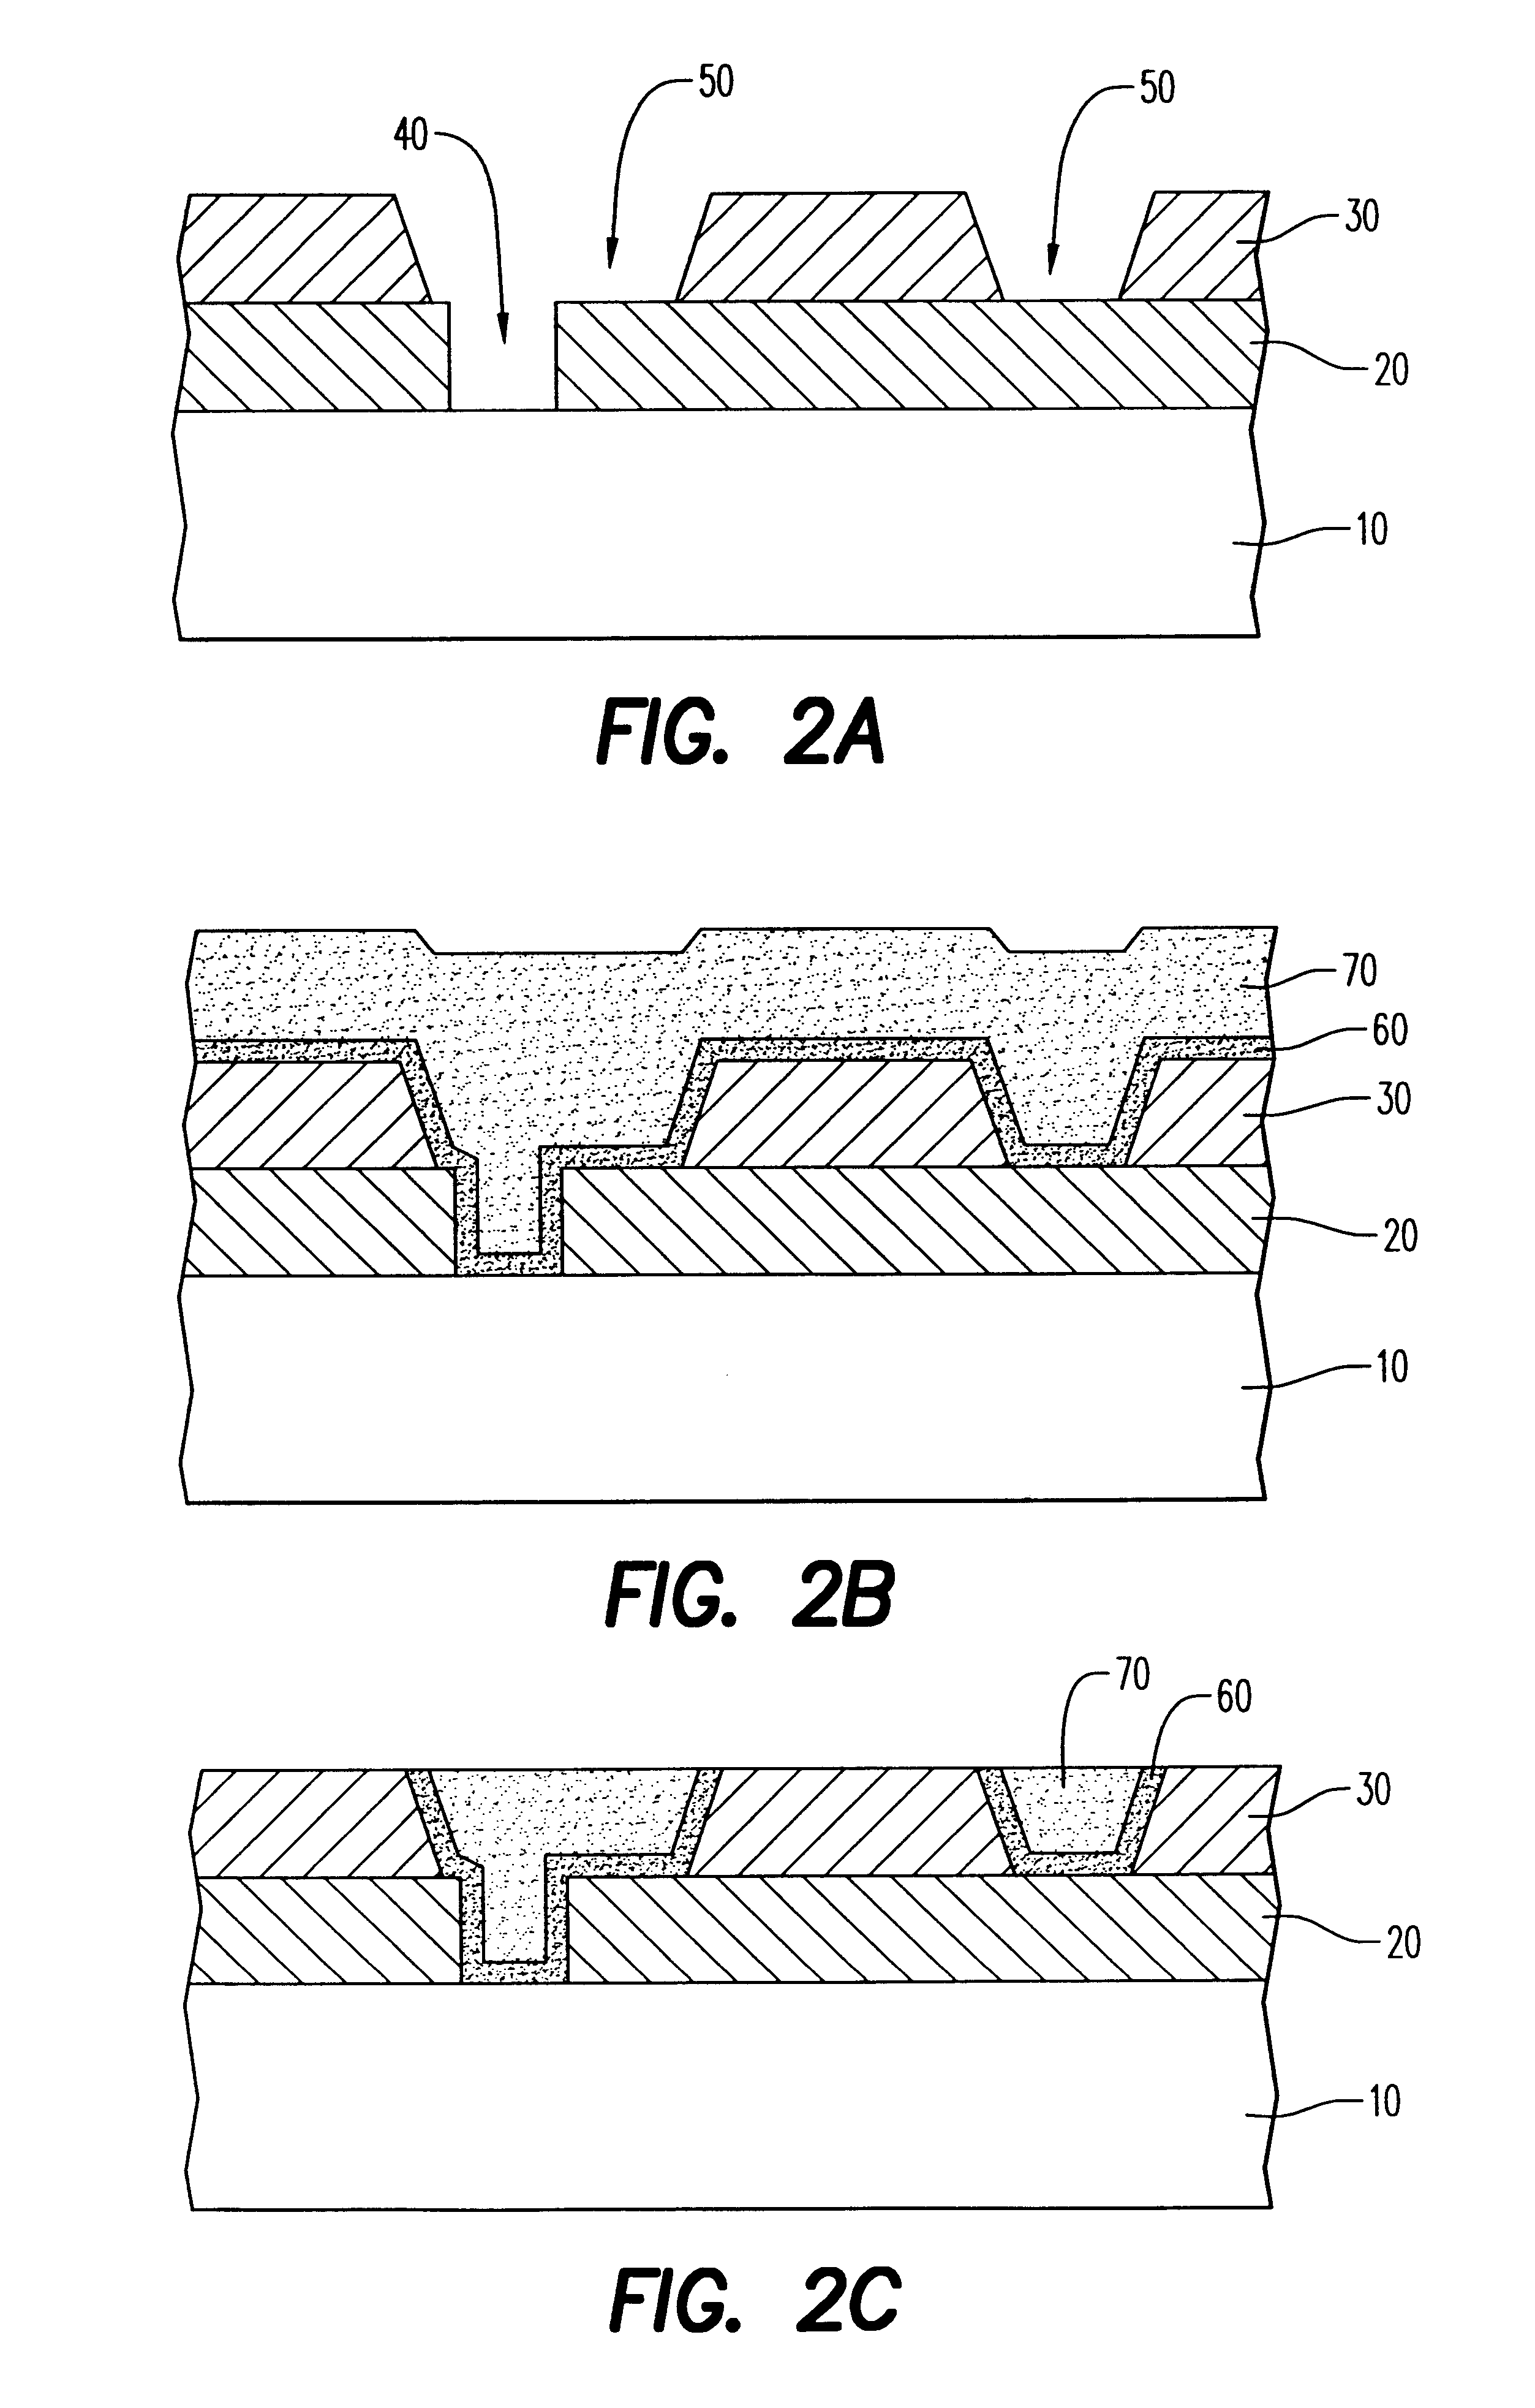 Chip interconnect wiring structure with low dielectric constant insulator and methods for fabricating the same